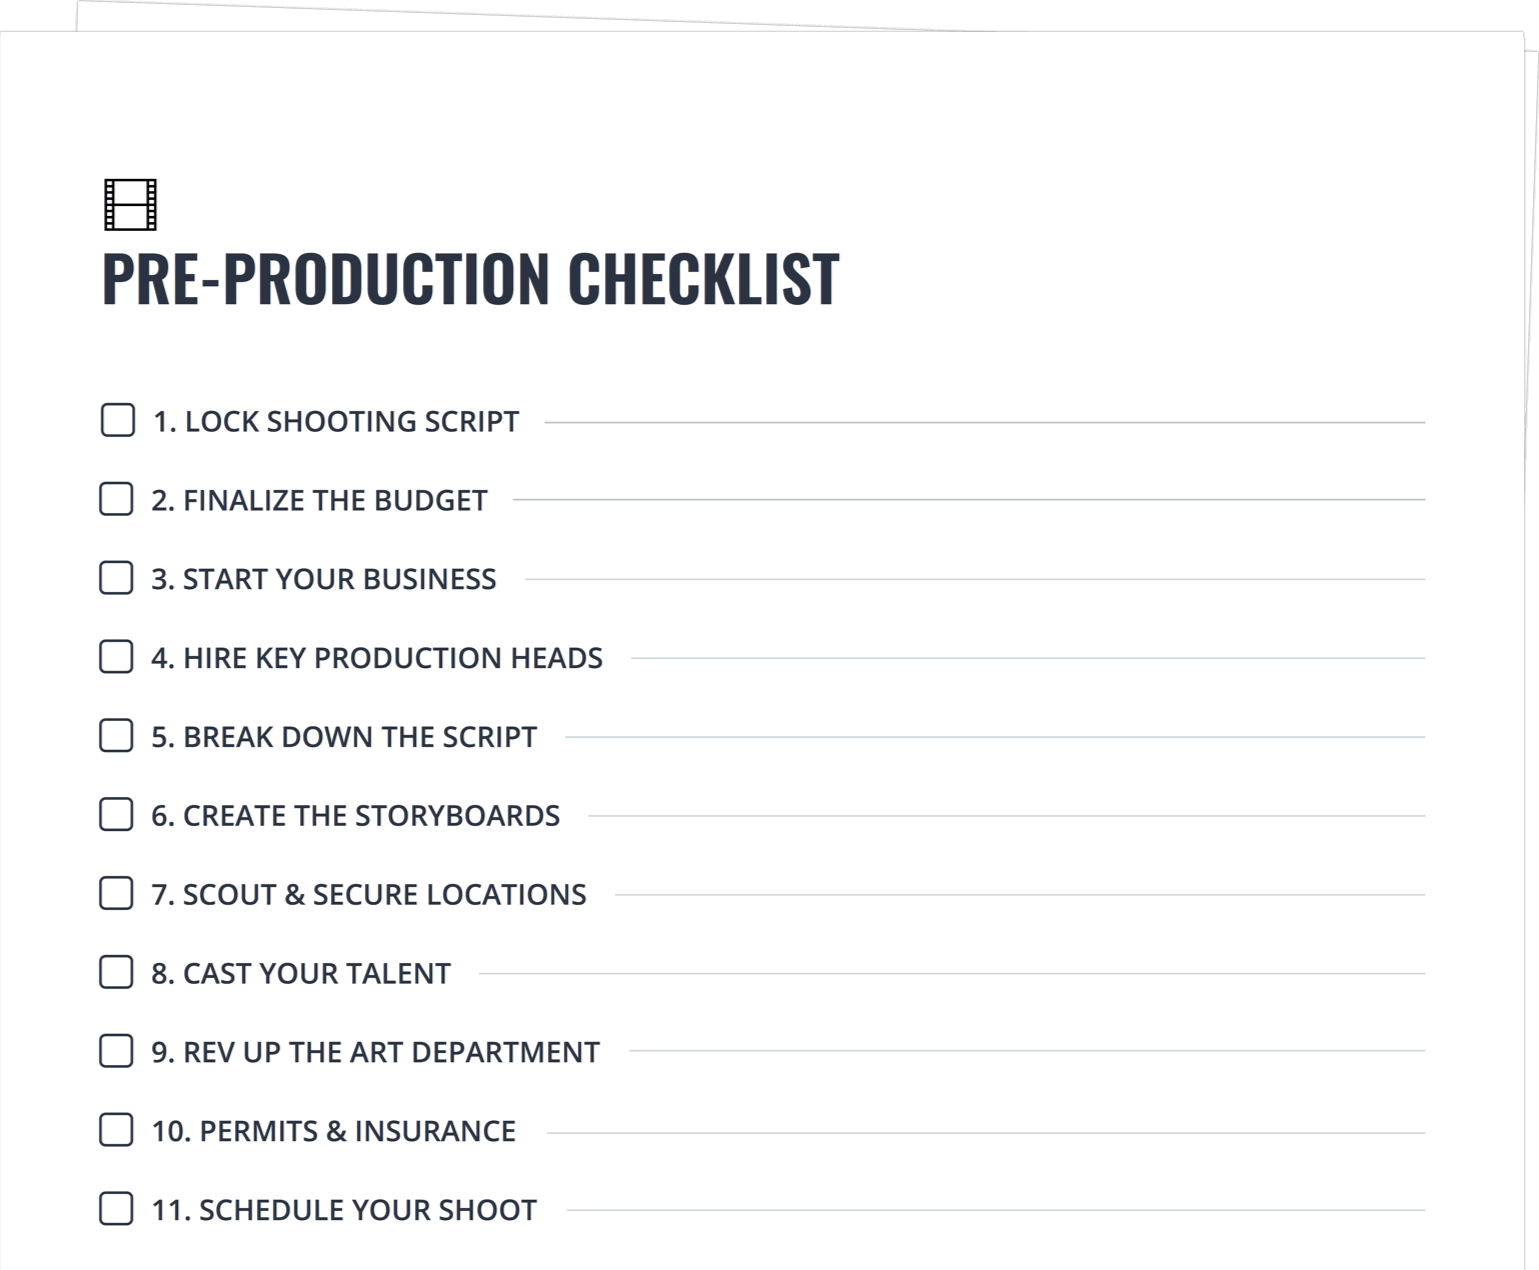 Pre-Production Checklist Made For Every Producer and Filmmaker - StudioBinder - Free Checklist - Exit Intent